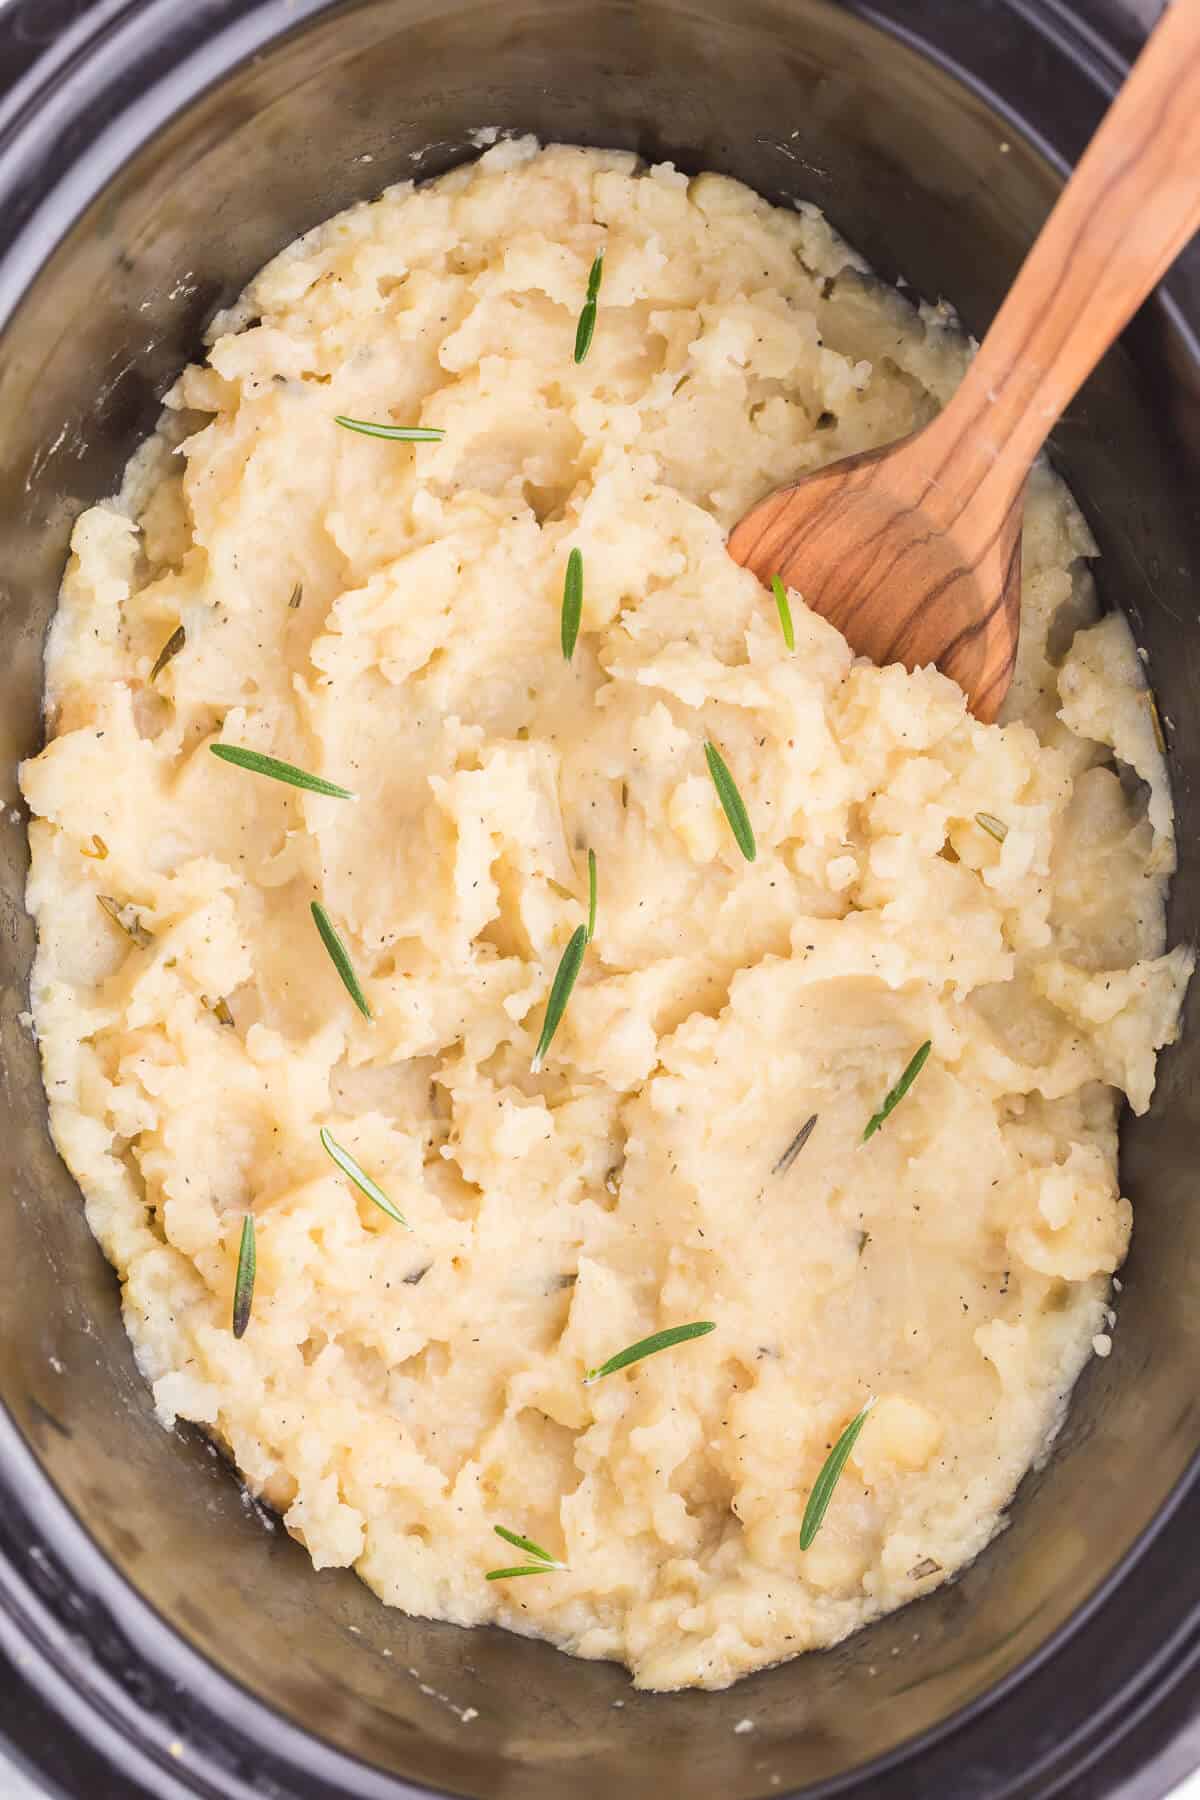 Slow Cooker Rosemary Garlic Mashed Potatoes - Make the creamiest mashed potatoes in your Crockpot! You'll love the rich, garlicky flavor in every bite for a delicious fall side dish.